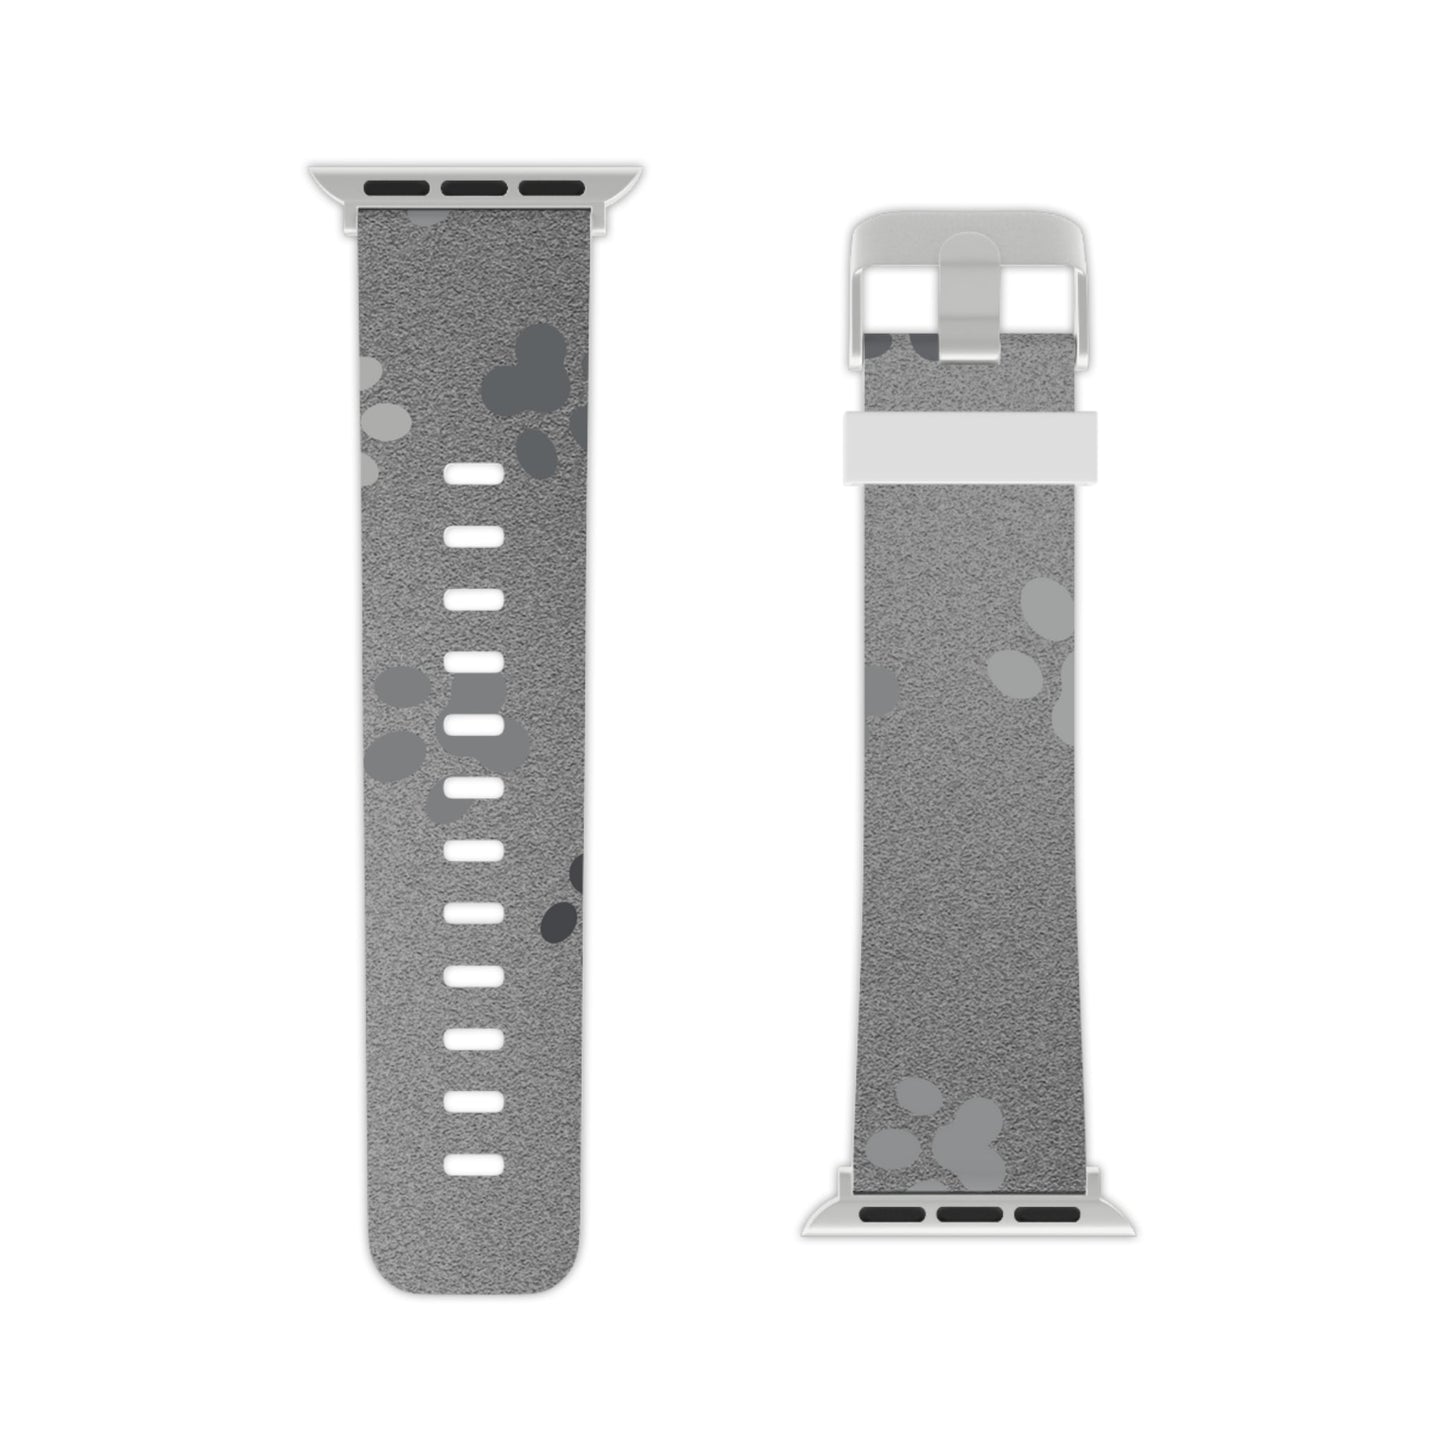 Paws in Silver Watch Band for Apple Watch - Accessories - Epileptic Al’s Shop